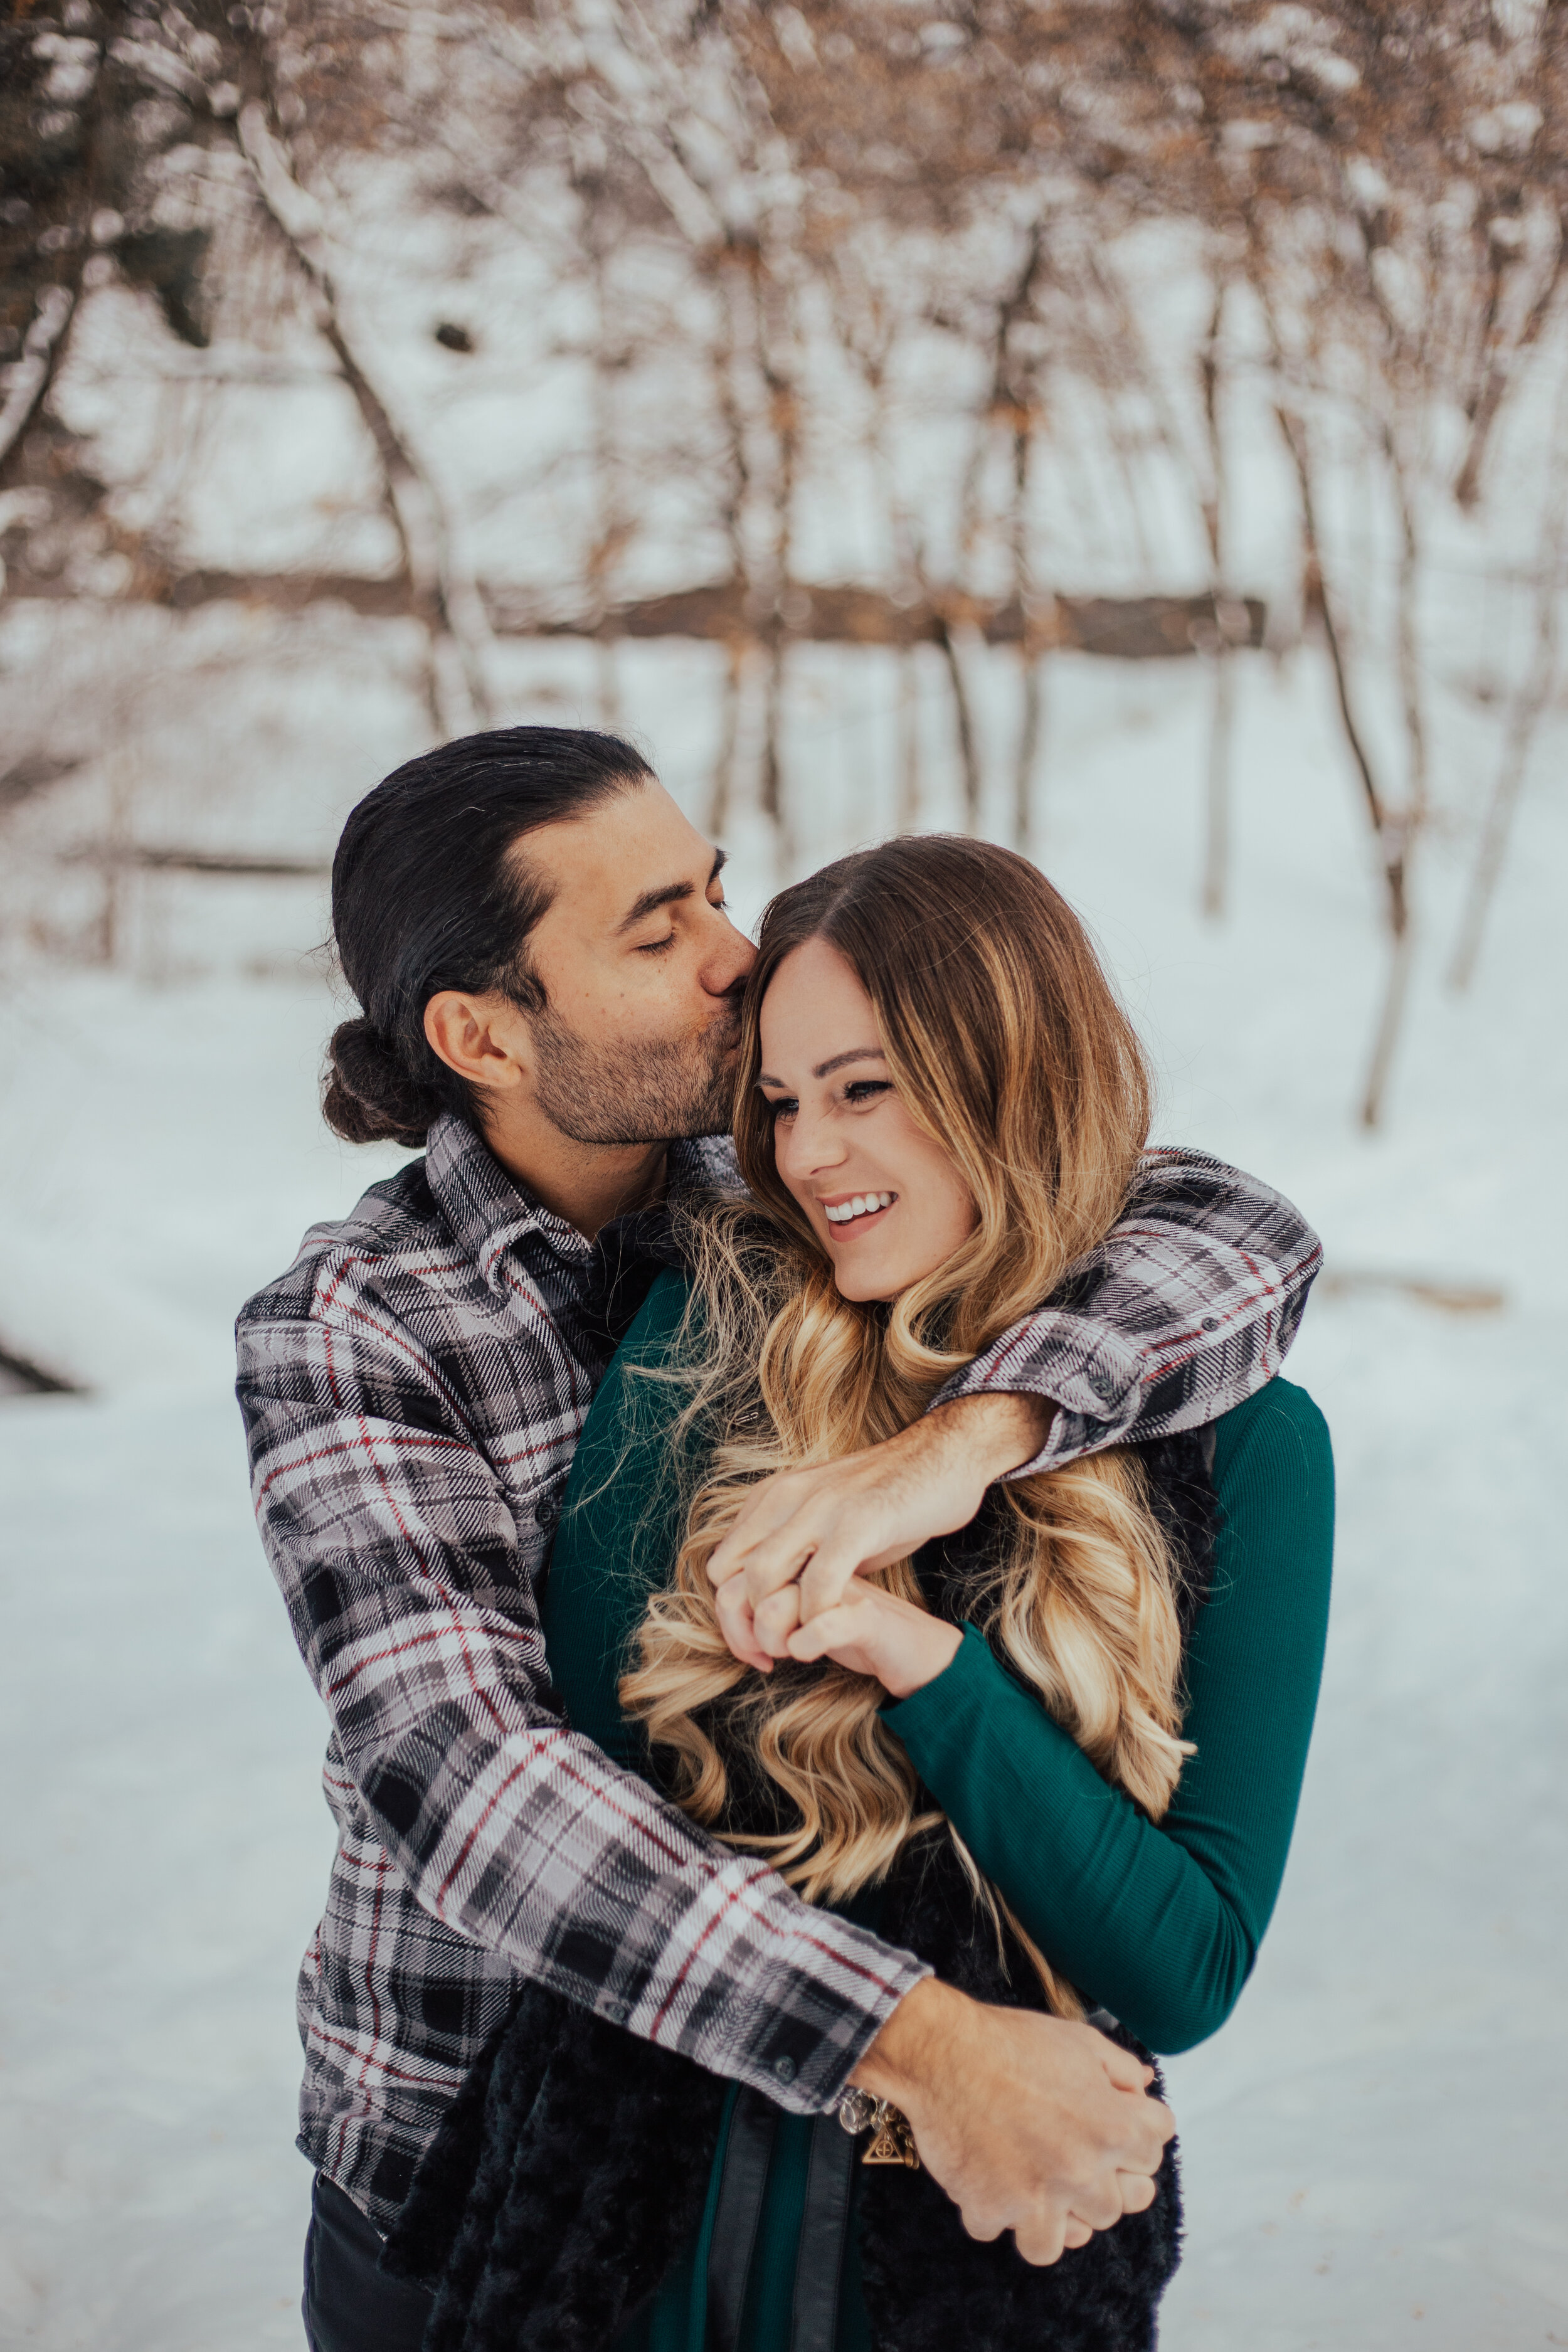 Snowy winter mountain couple anniversary shoot engagement session romantic playful happy #utahphotographer #weddingphotographer #engagements #coupleshoot #engagementsession